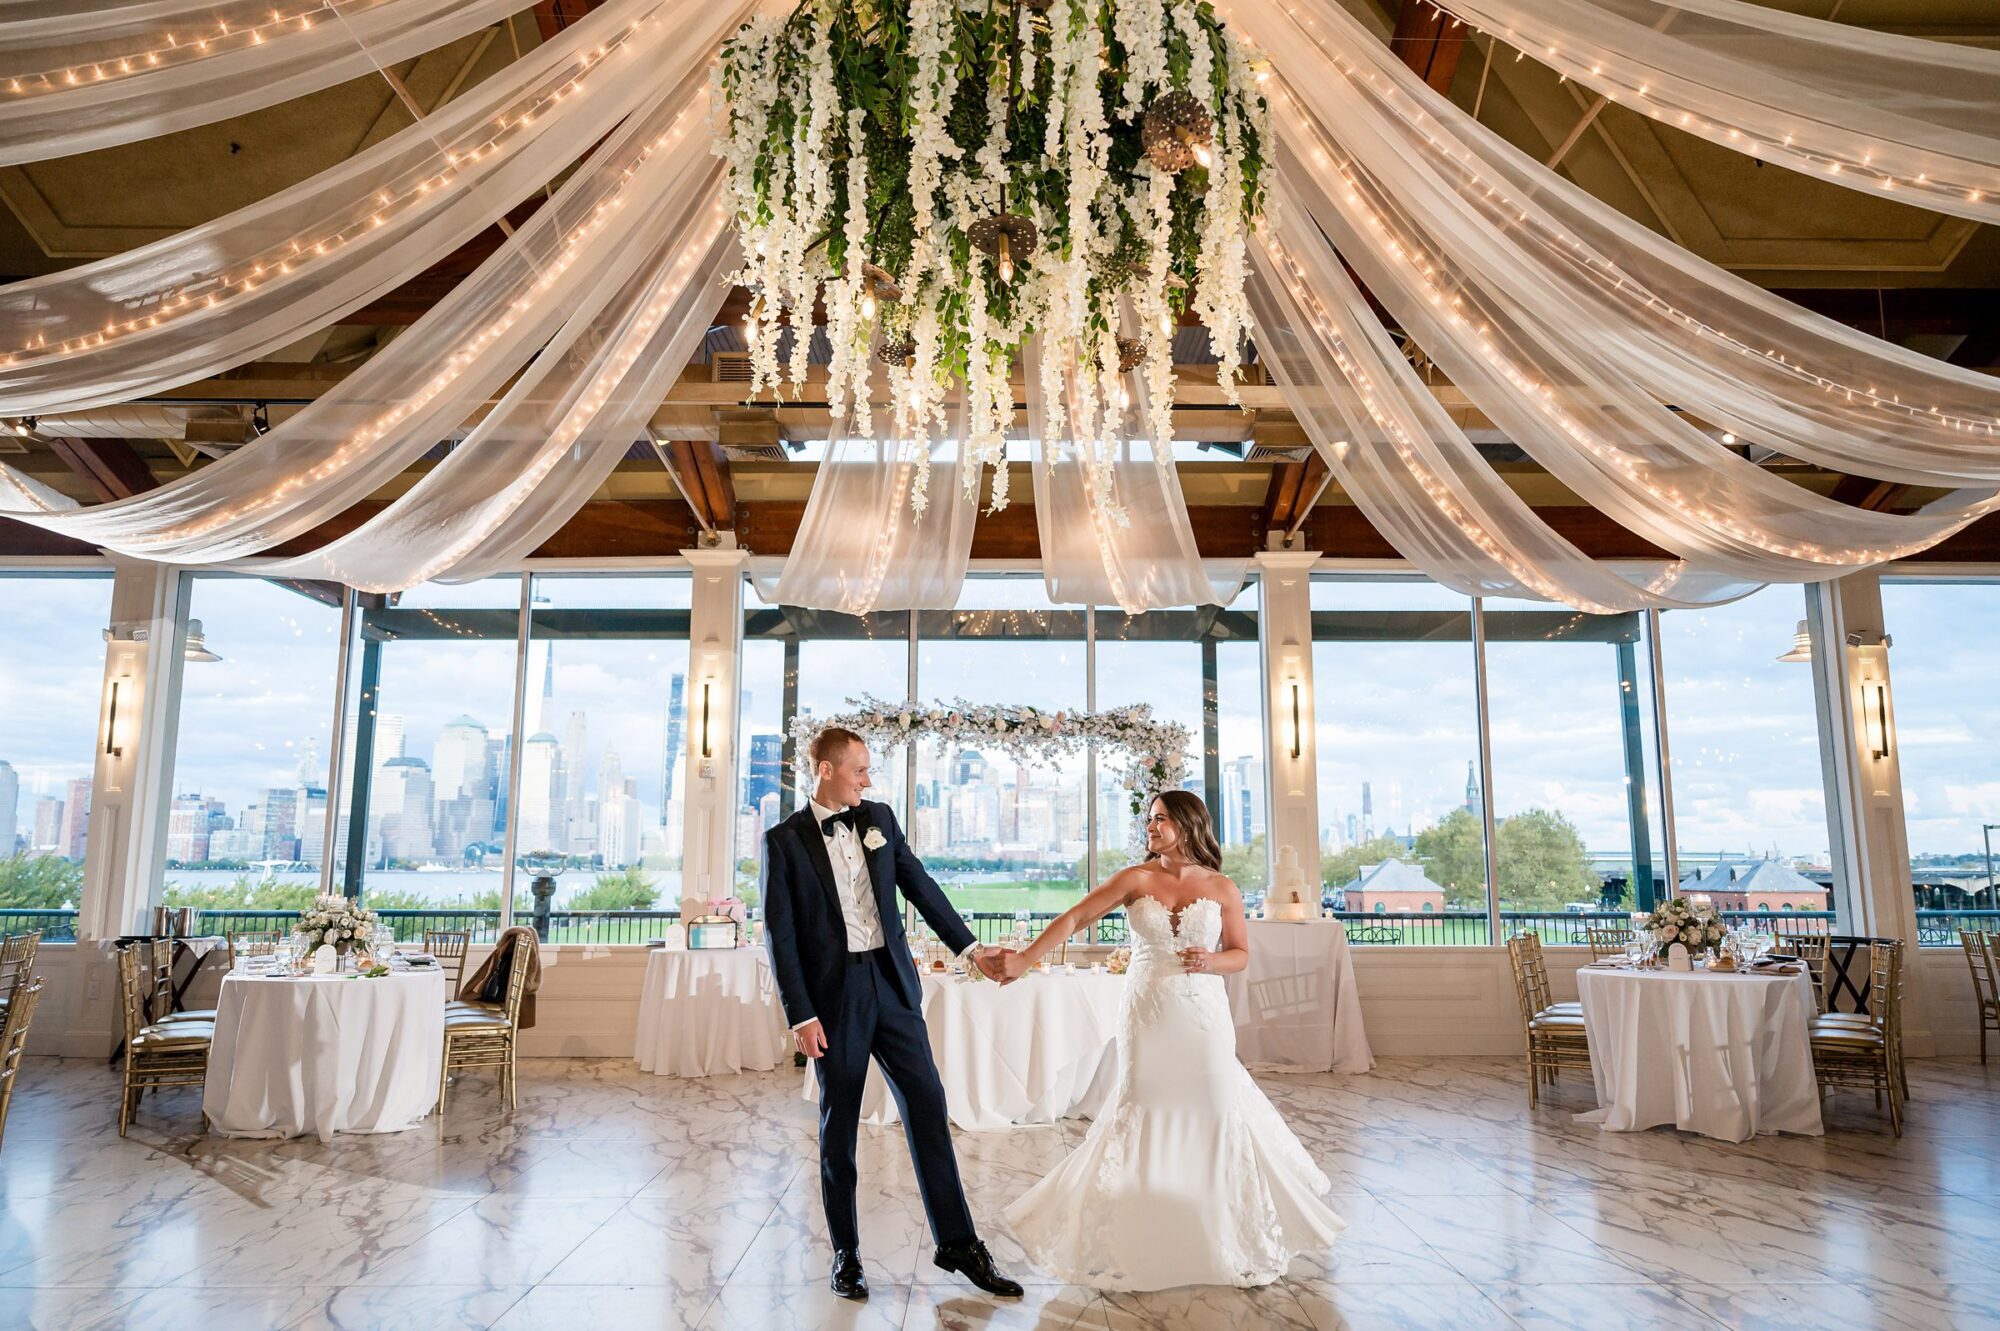 A bride and groom dance in a large ballroom with a chandelier at Liberty House in Jersey City NJ